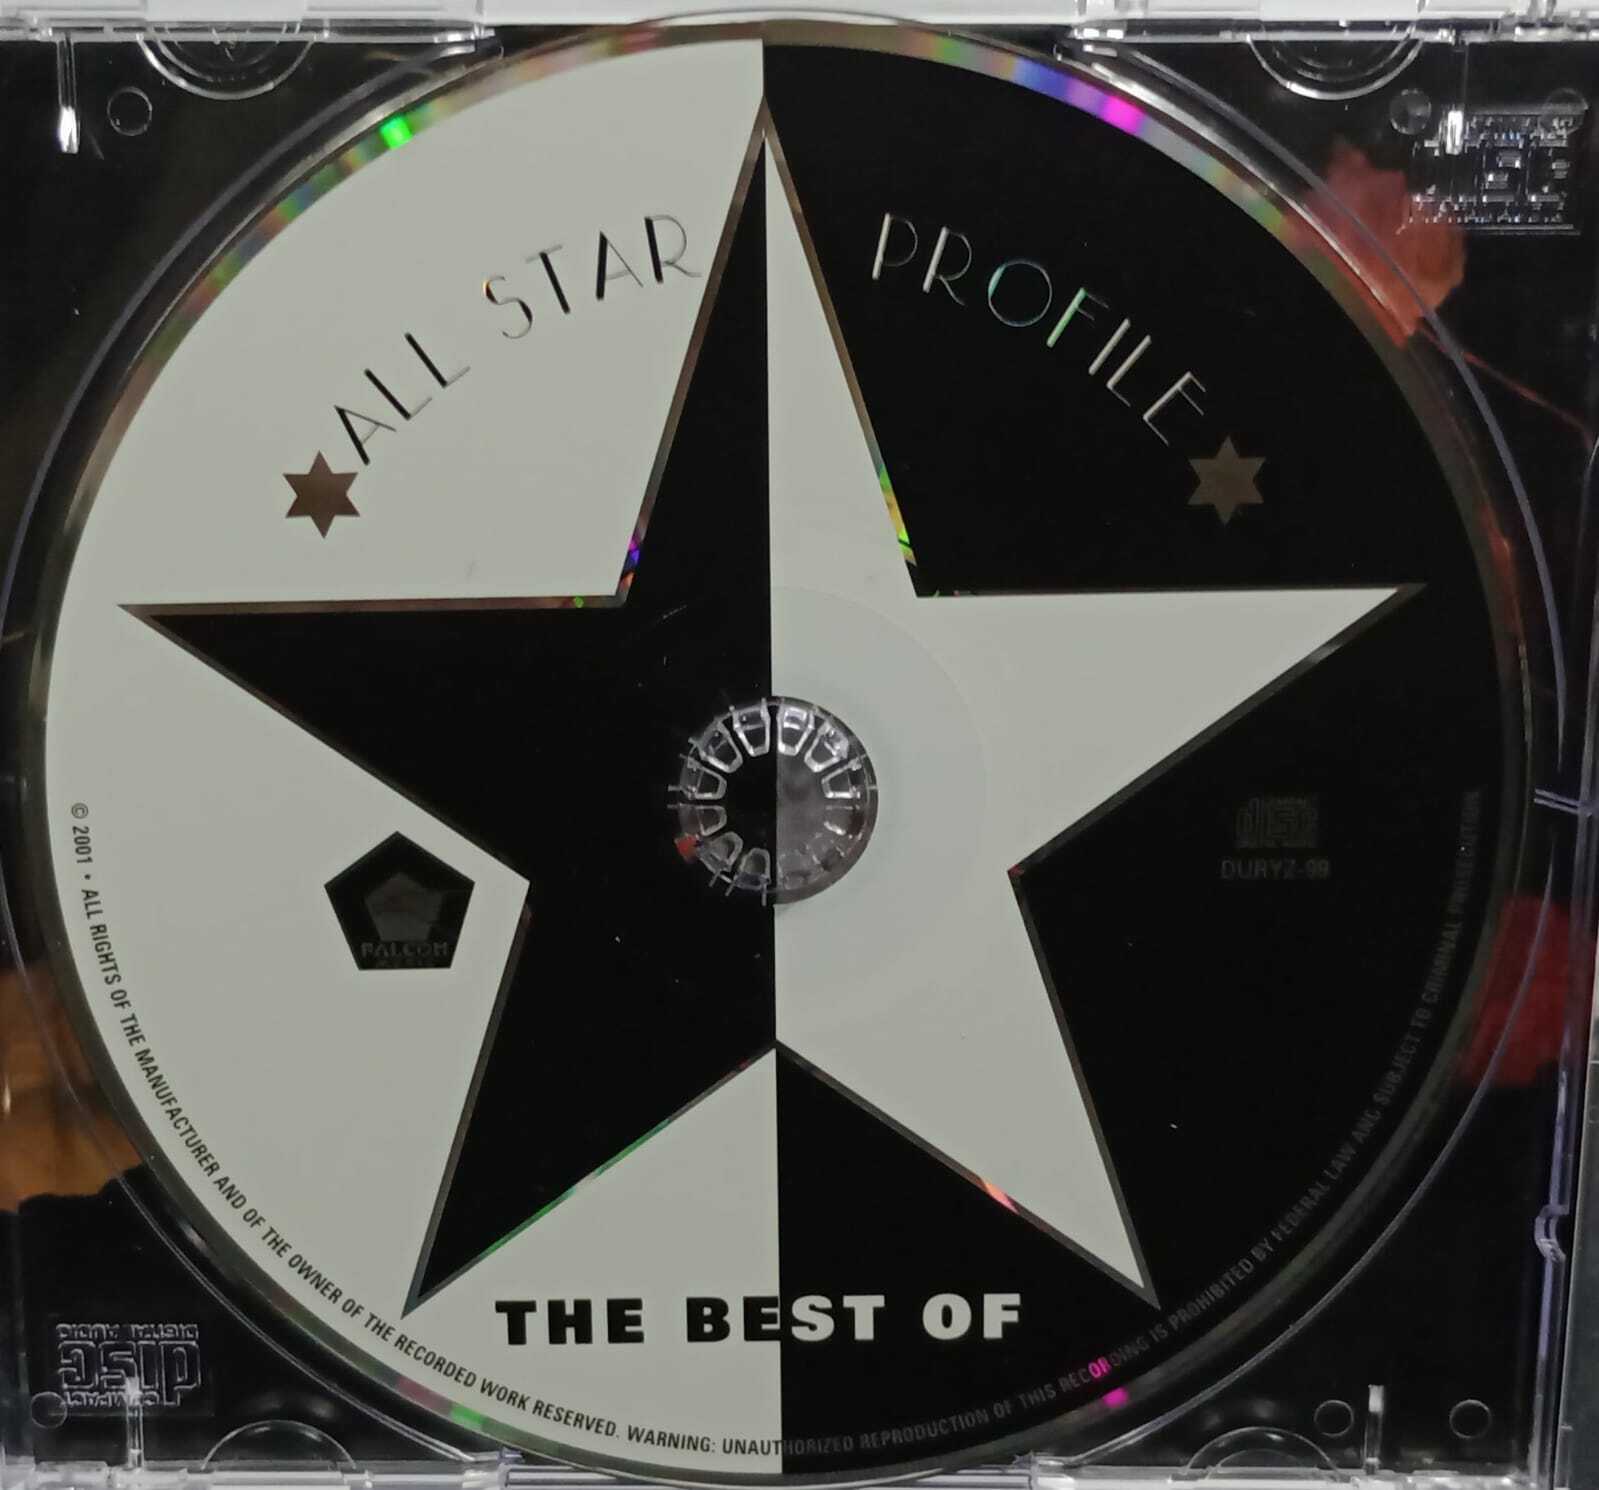 CD - Duran Duran - The Best Of - All Star Profile Series (Holland)